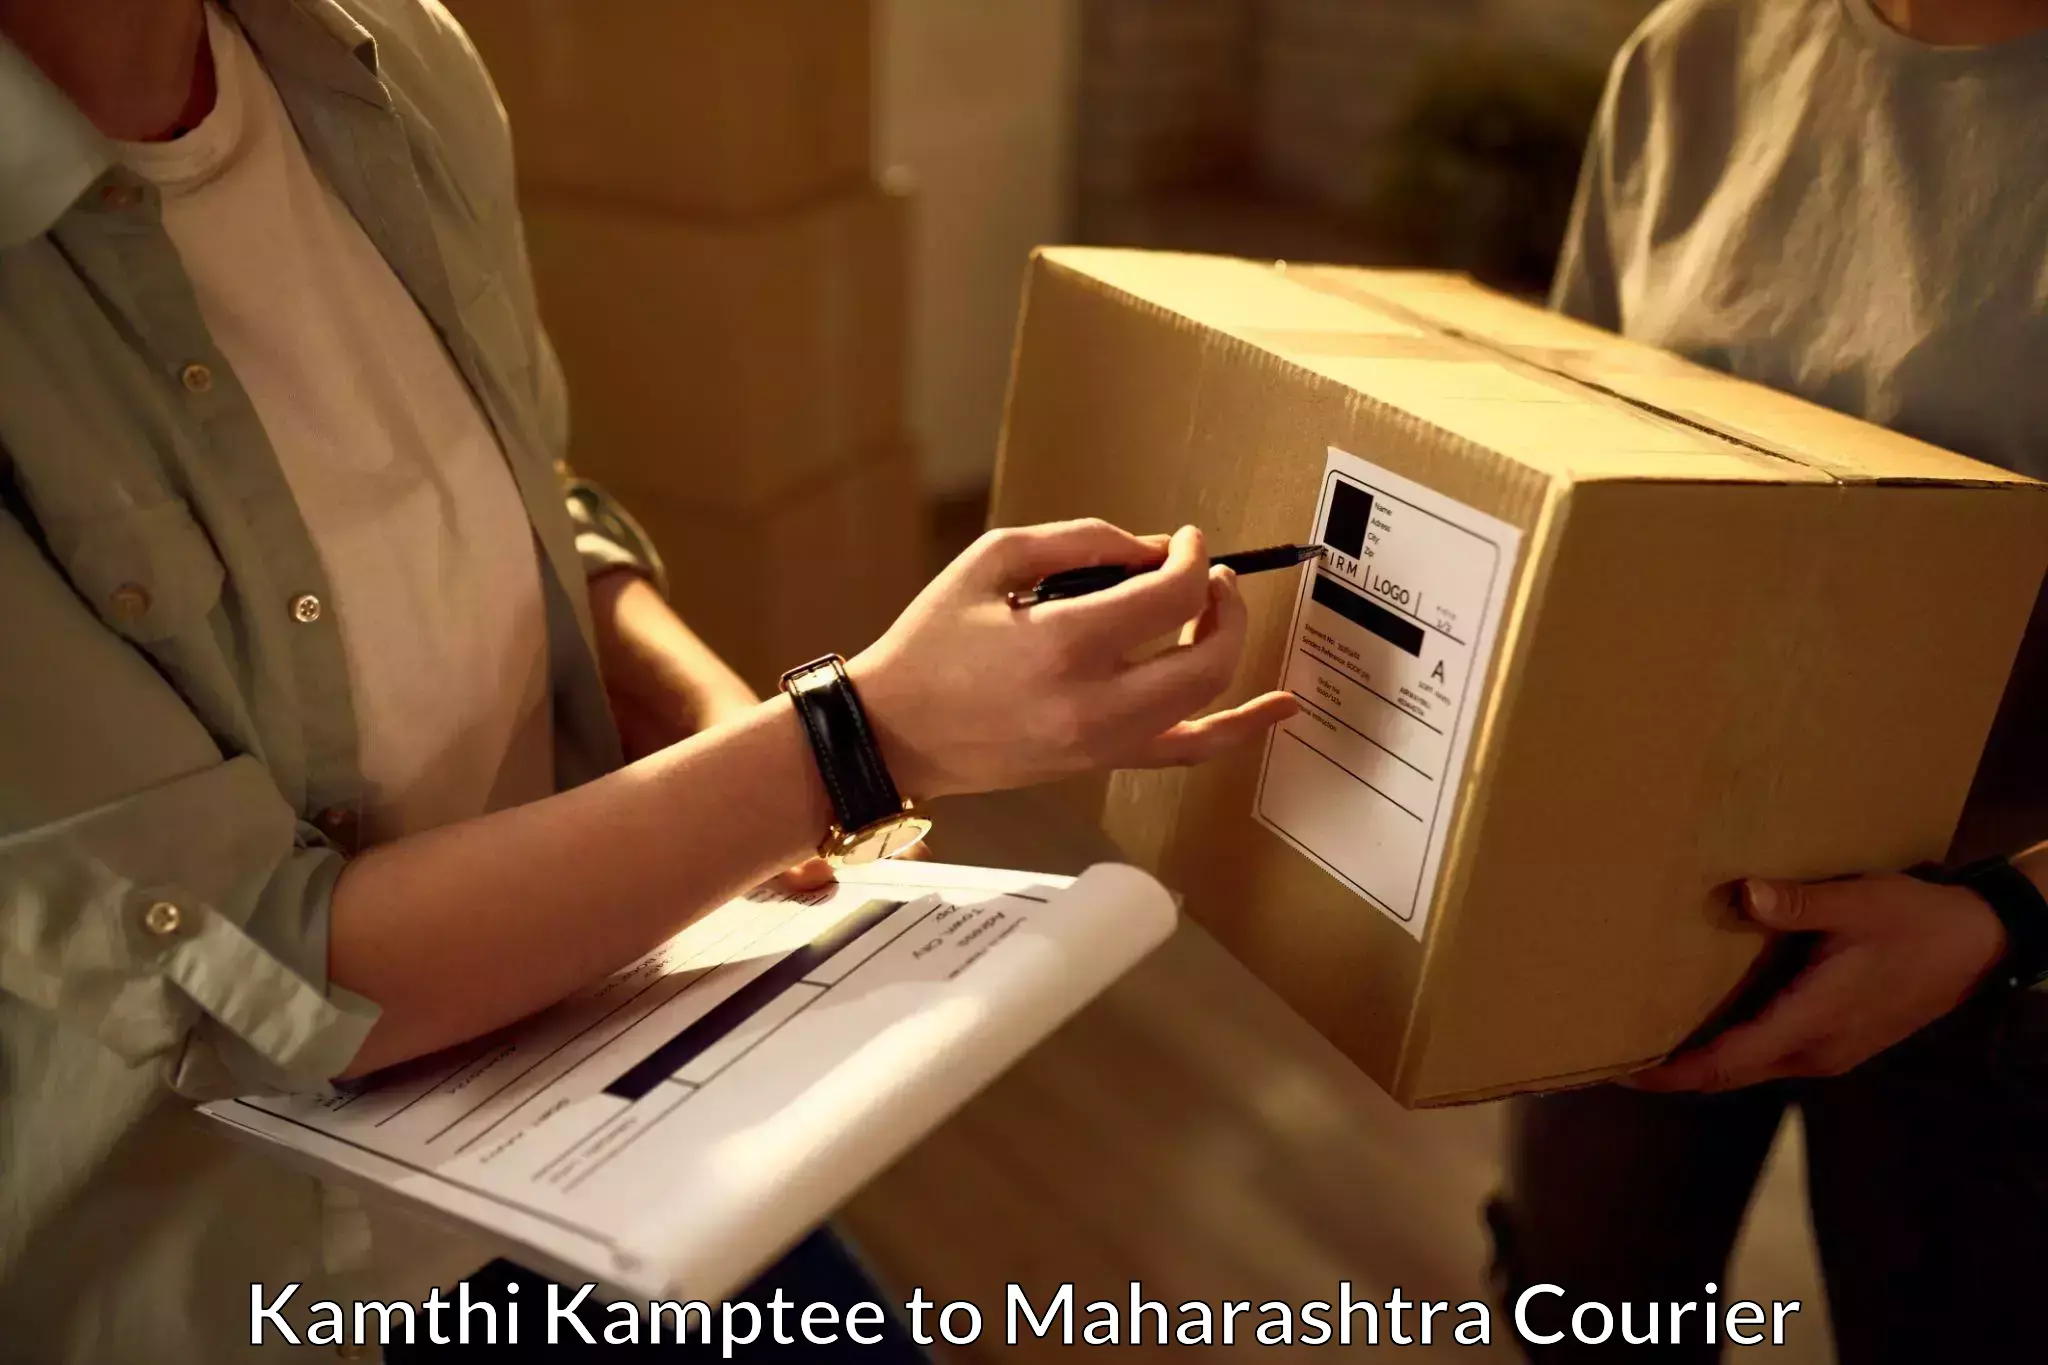 24/7 courier service in Kamthi Kamptee to Nira